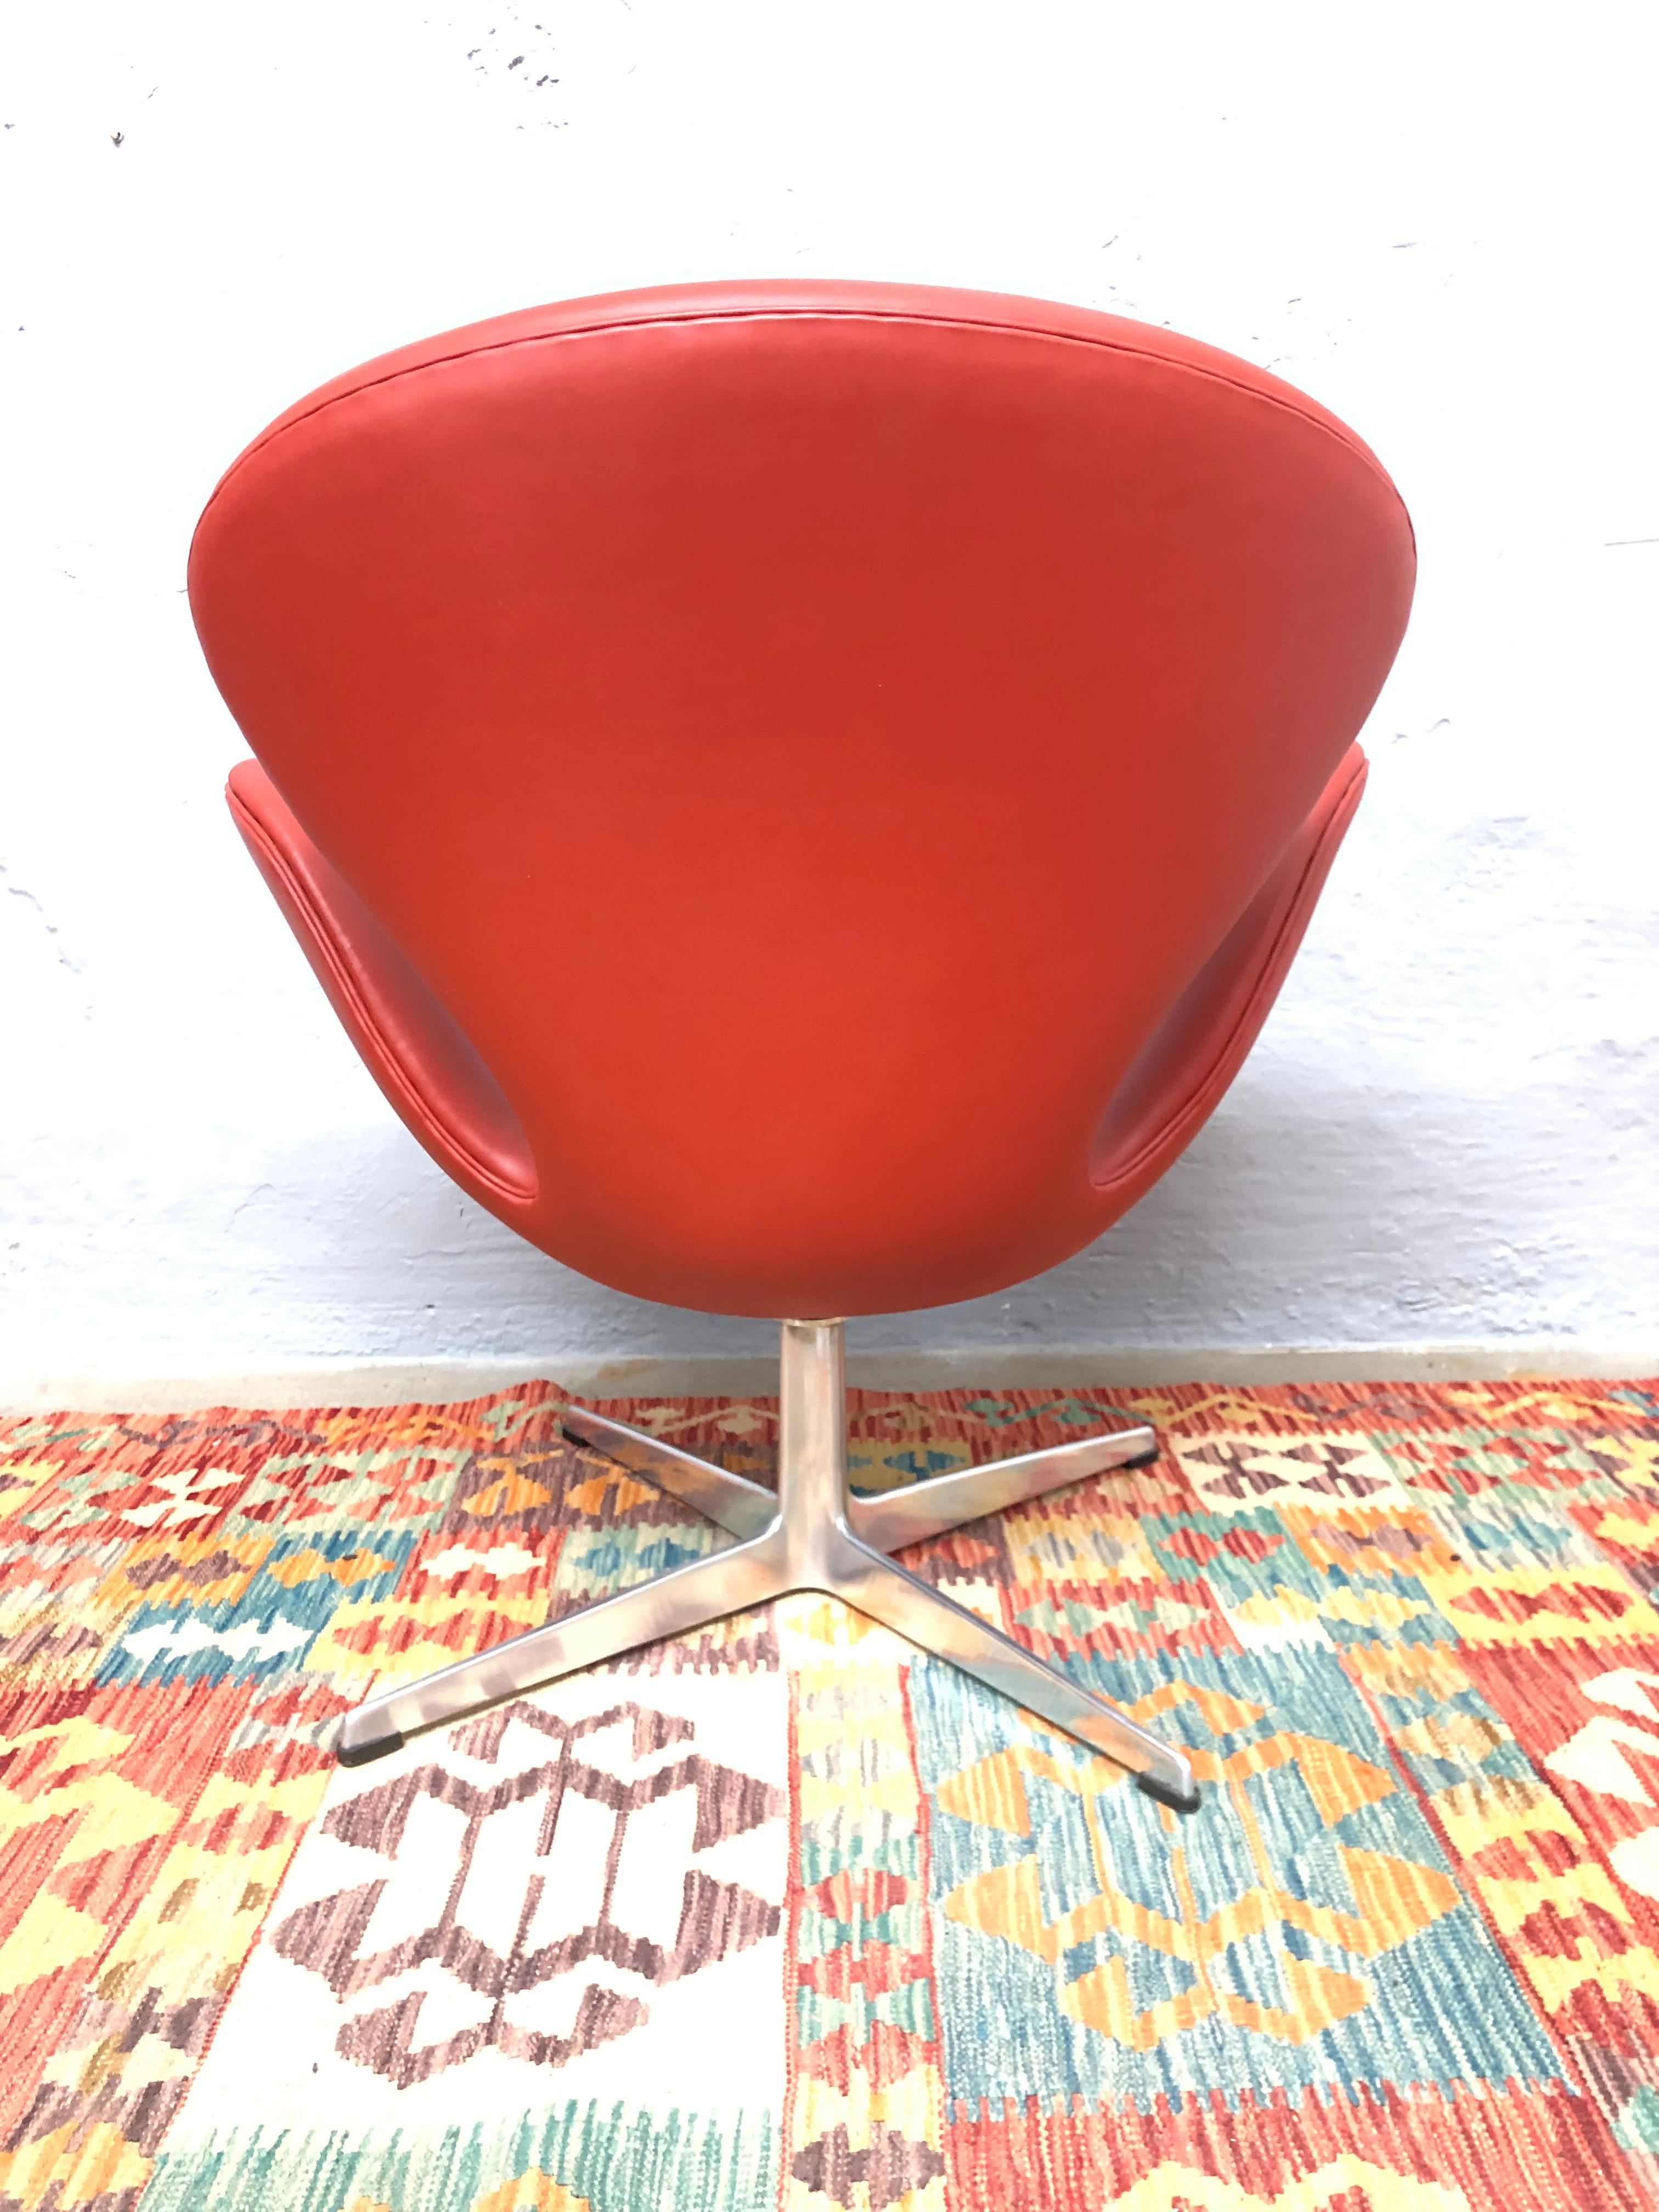 Vintage Iconic First Edition Arne Jacobsen 3320 Lounge Chair Designed in 1958 3